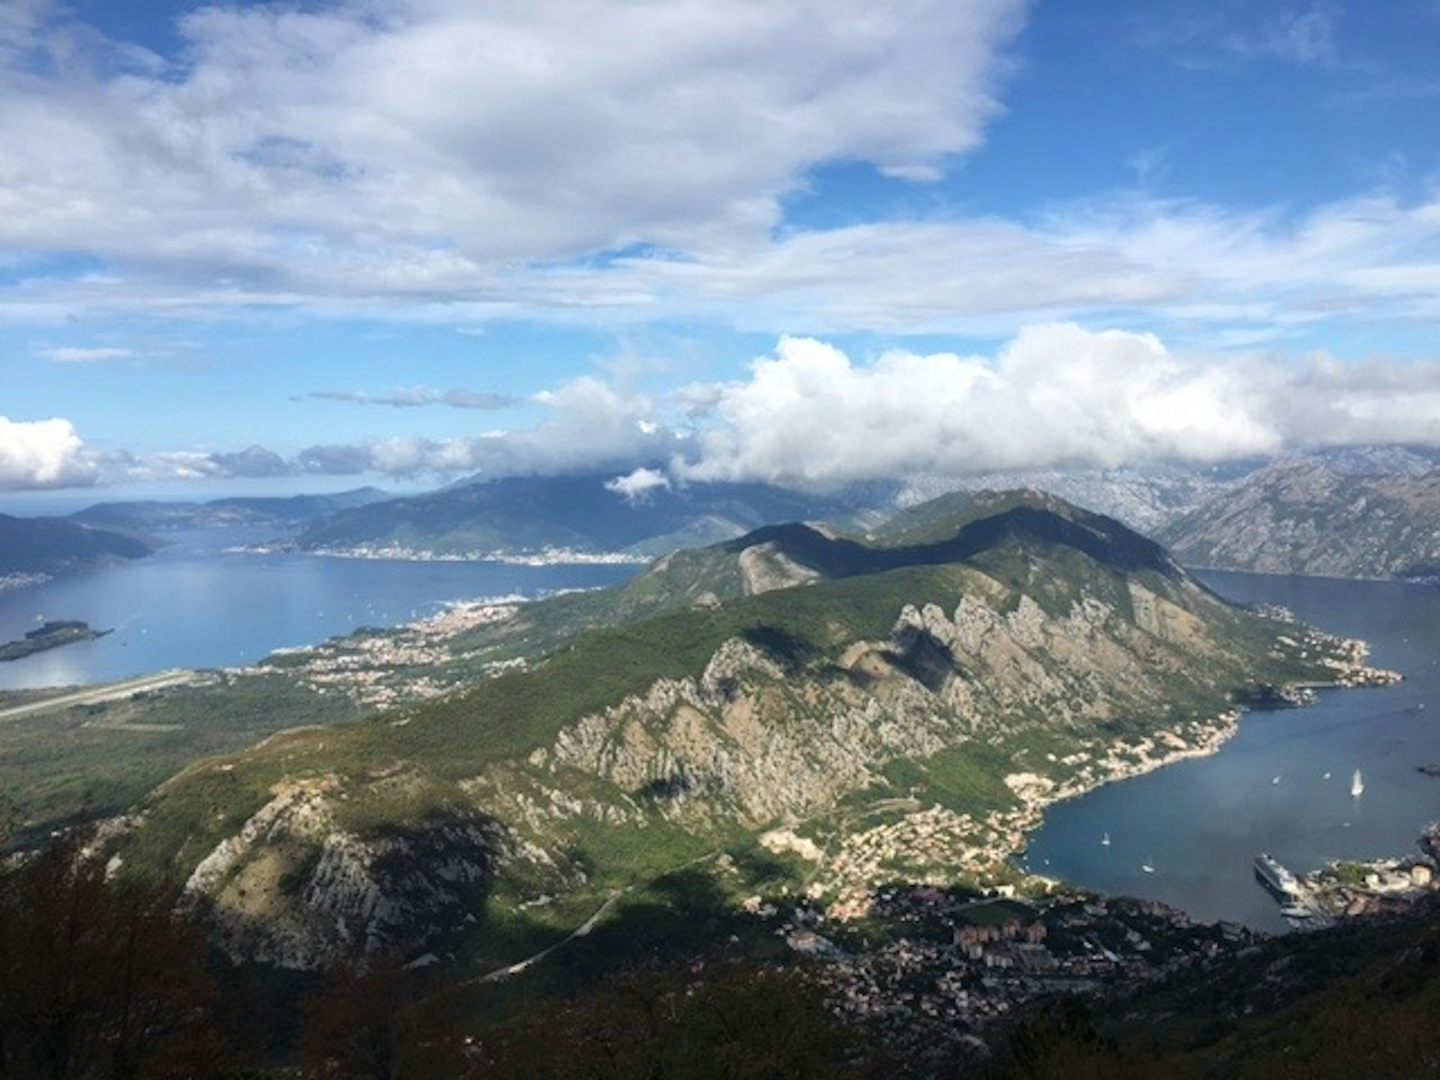 Scenic view of the Harbor of Kotor, Montenegro with the Viking Sea.